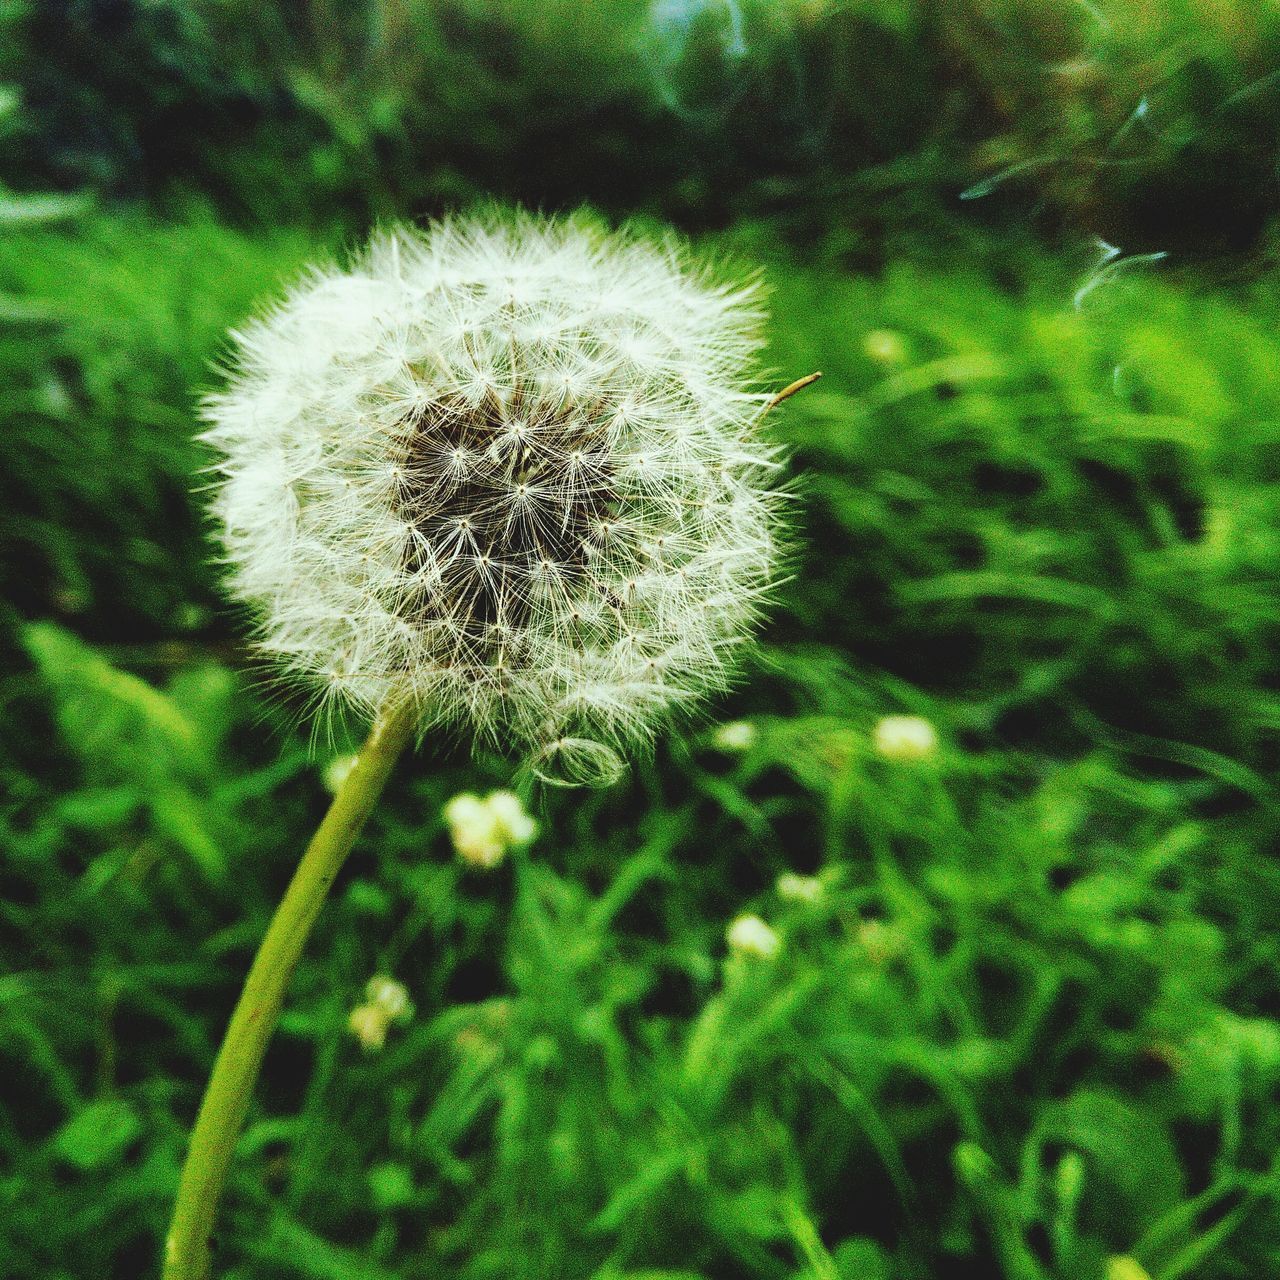 growth, dandelion, flower, freshness, fragility, beauty in nature, nature, flower head, white color, plant, close-up, green color, single flower, uncultivated, softness, field, high angle view, wildflower, outdoors, day